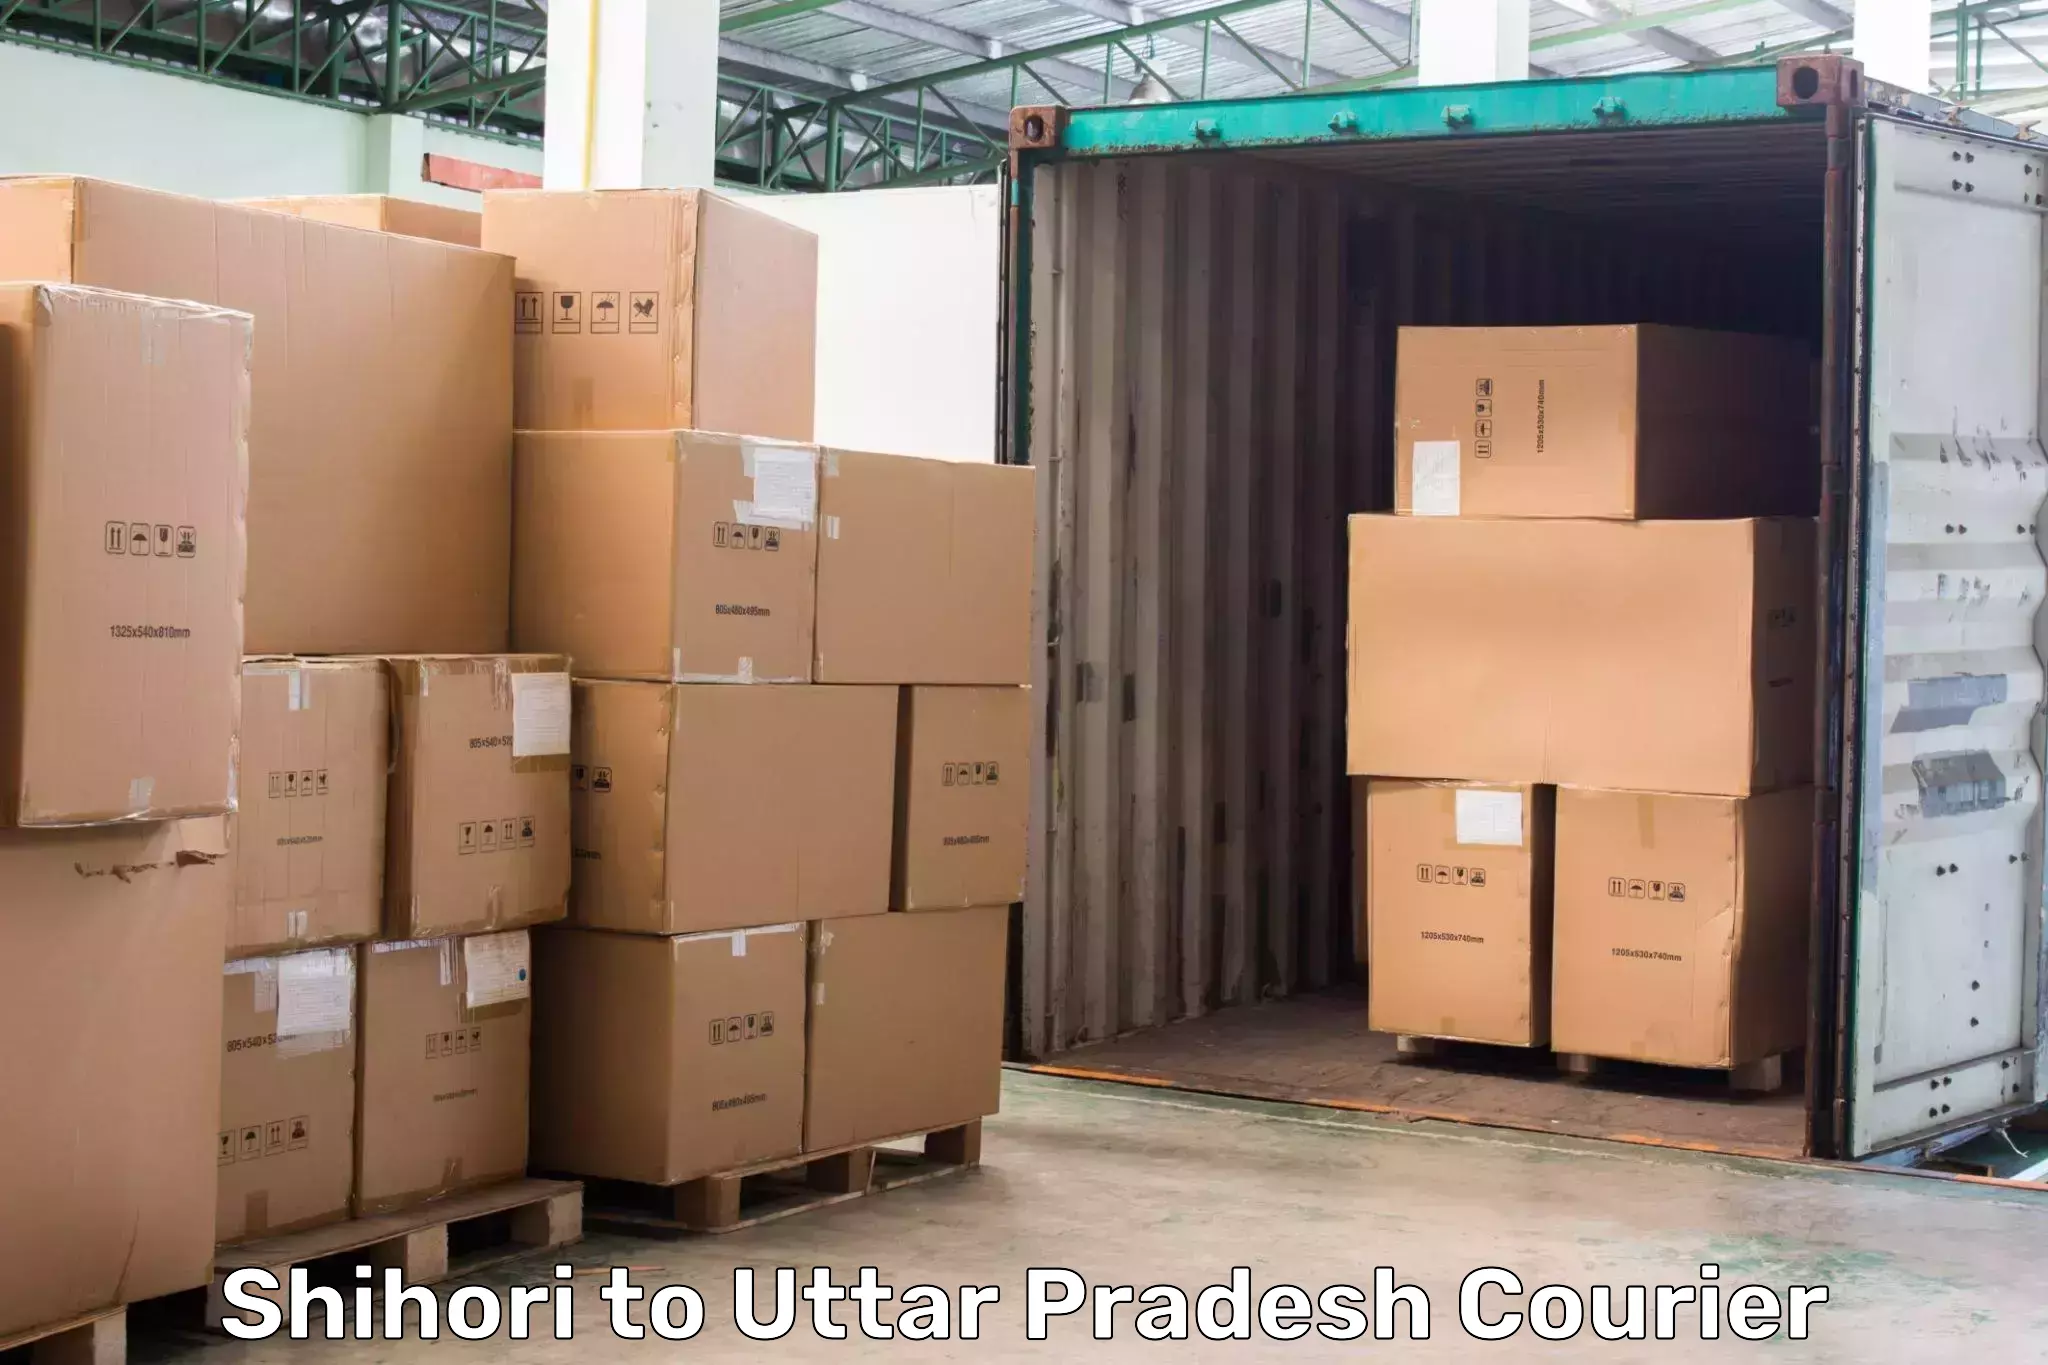 Local courier options Shihori to Jhansi